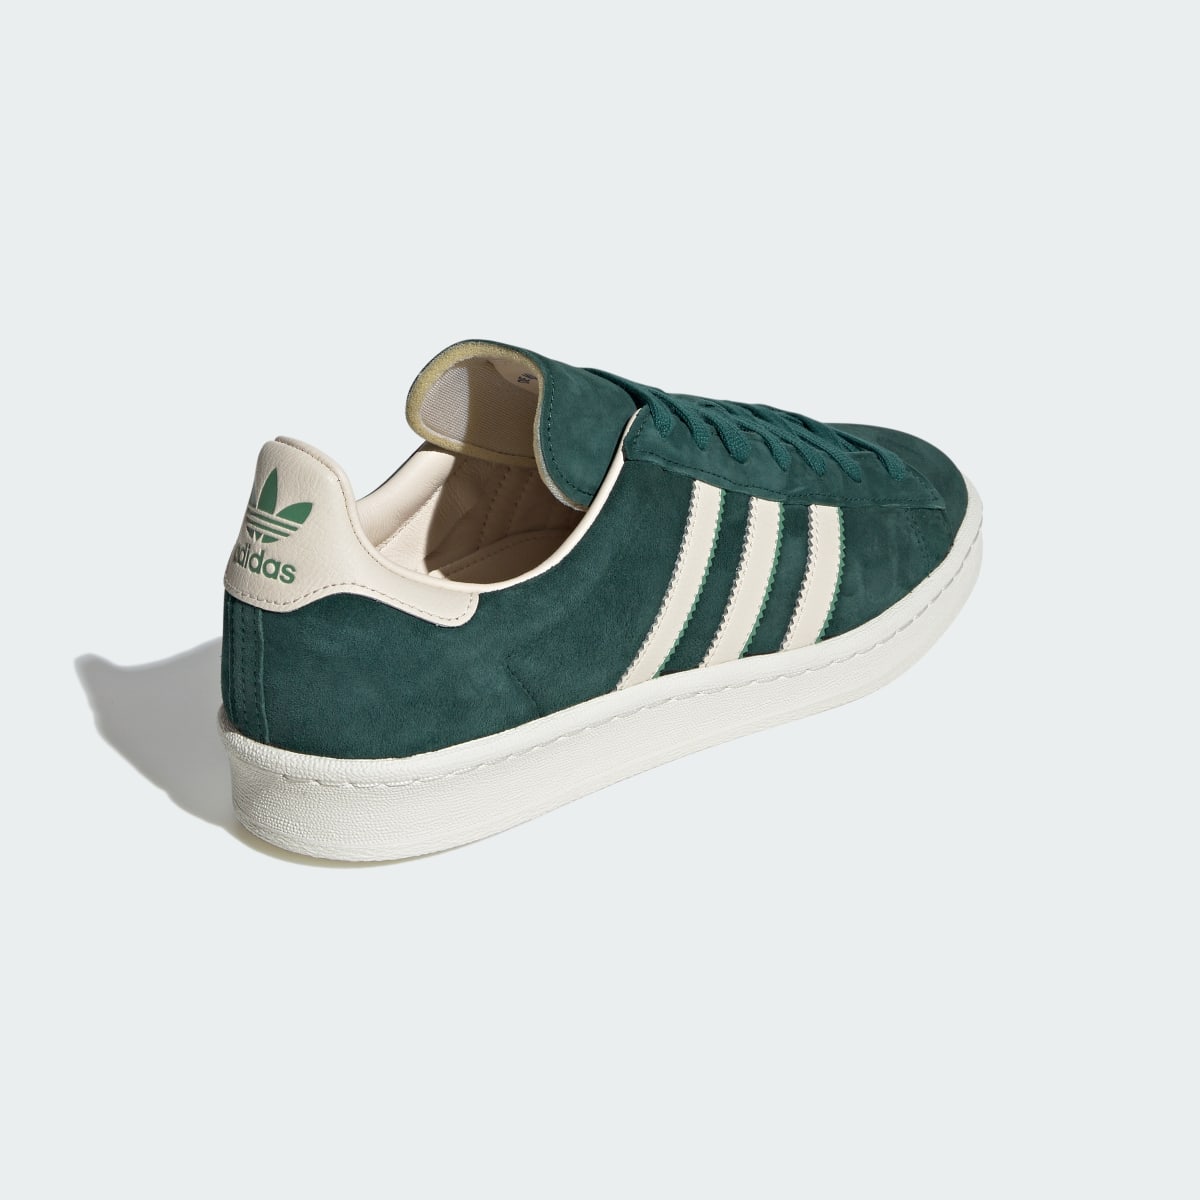 Adidas Campus 80s Shoes. 6